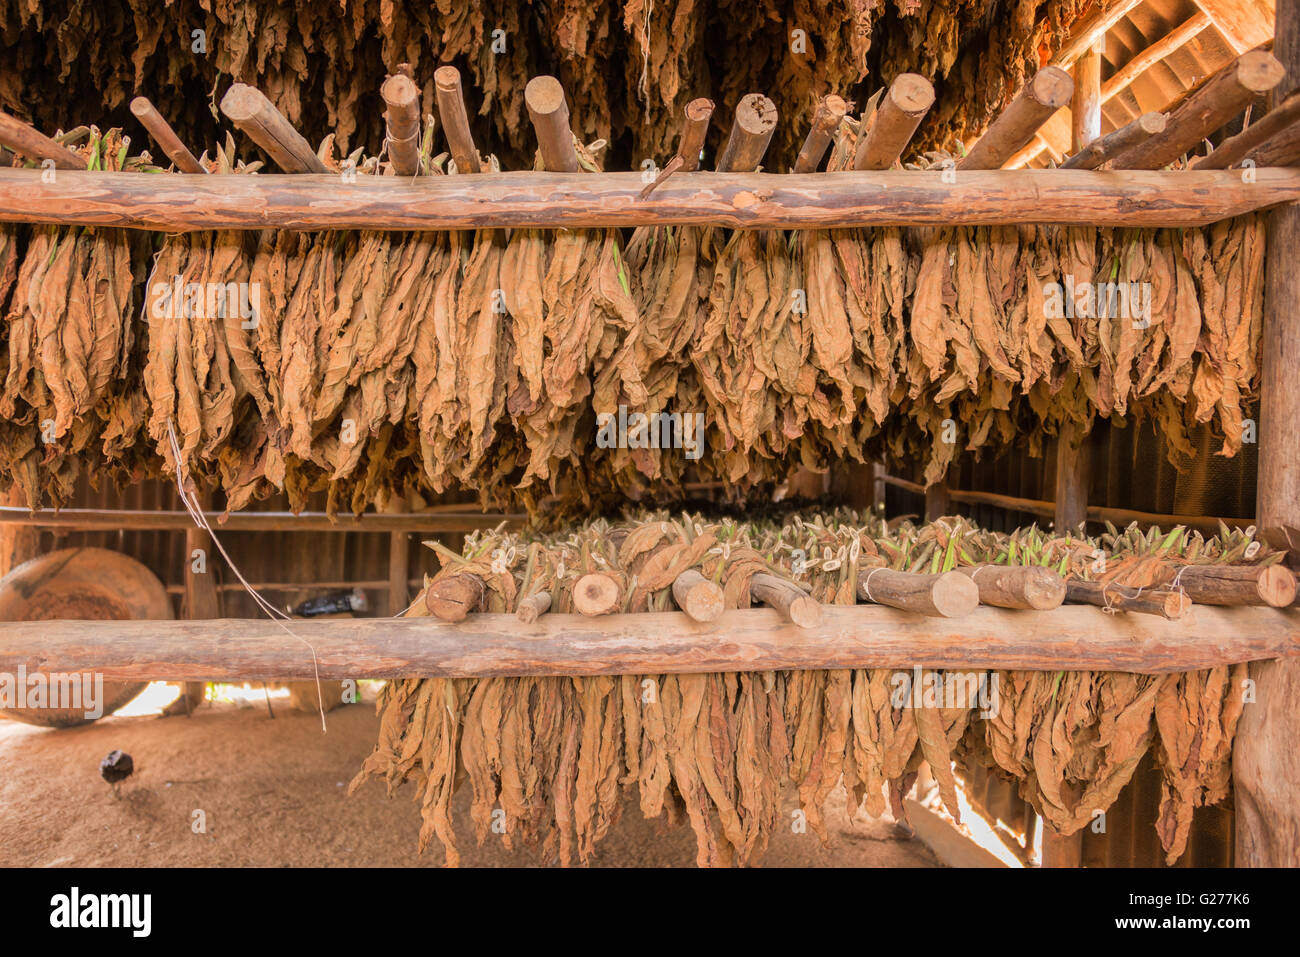 Tobacco leaves drying in a shed, Cuba Stock Photo